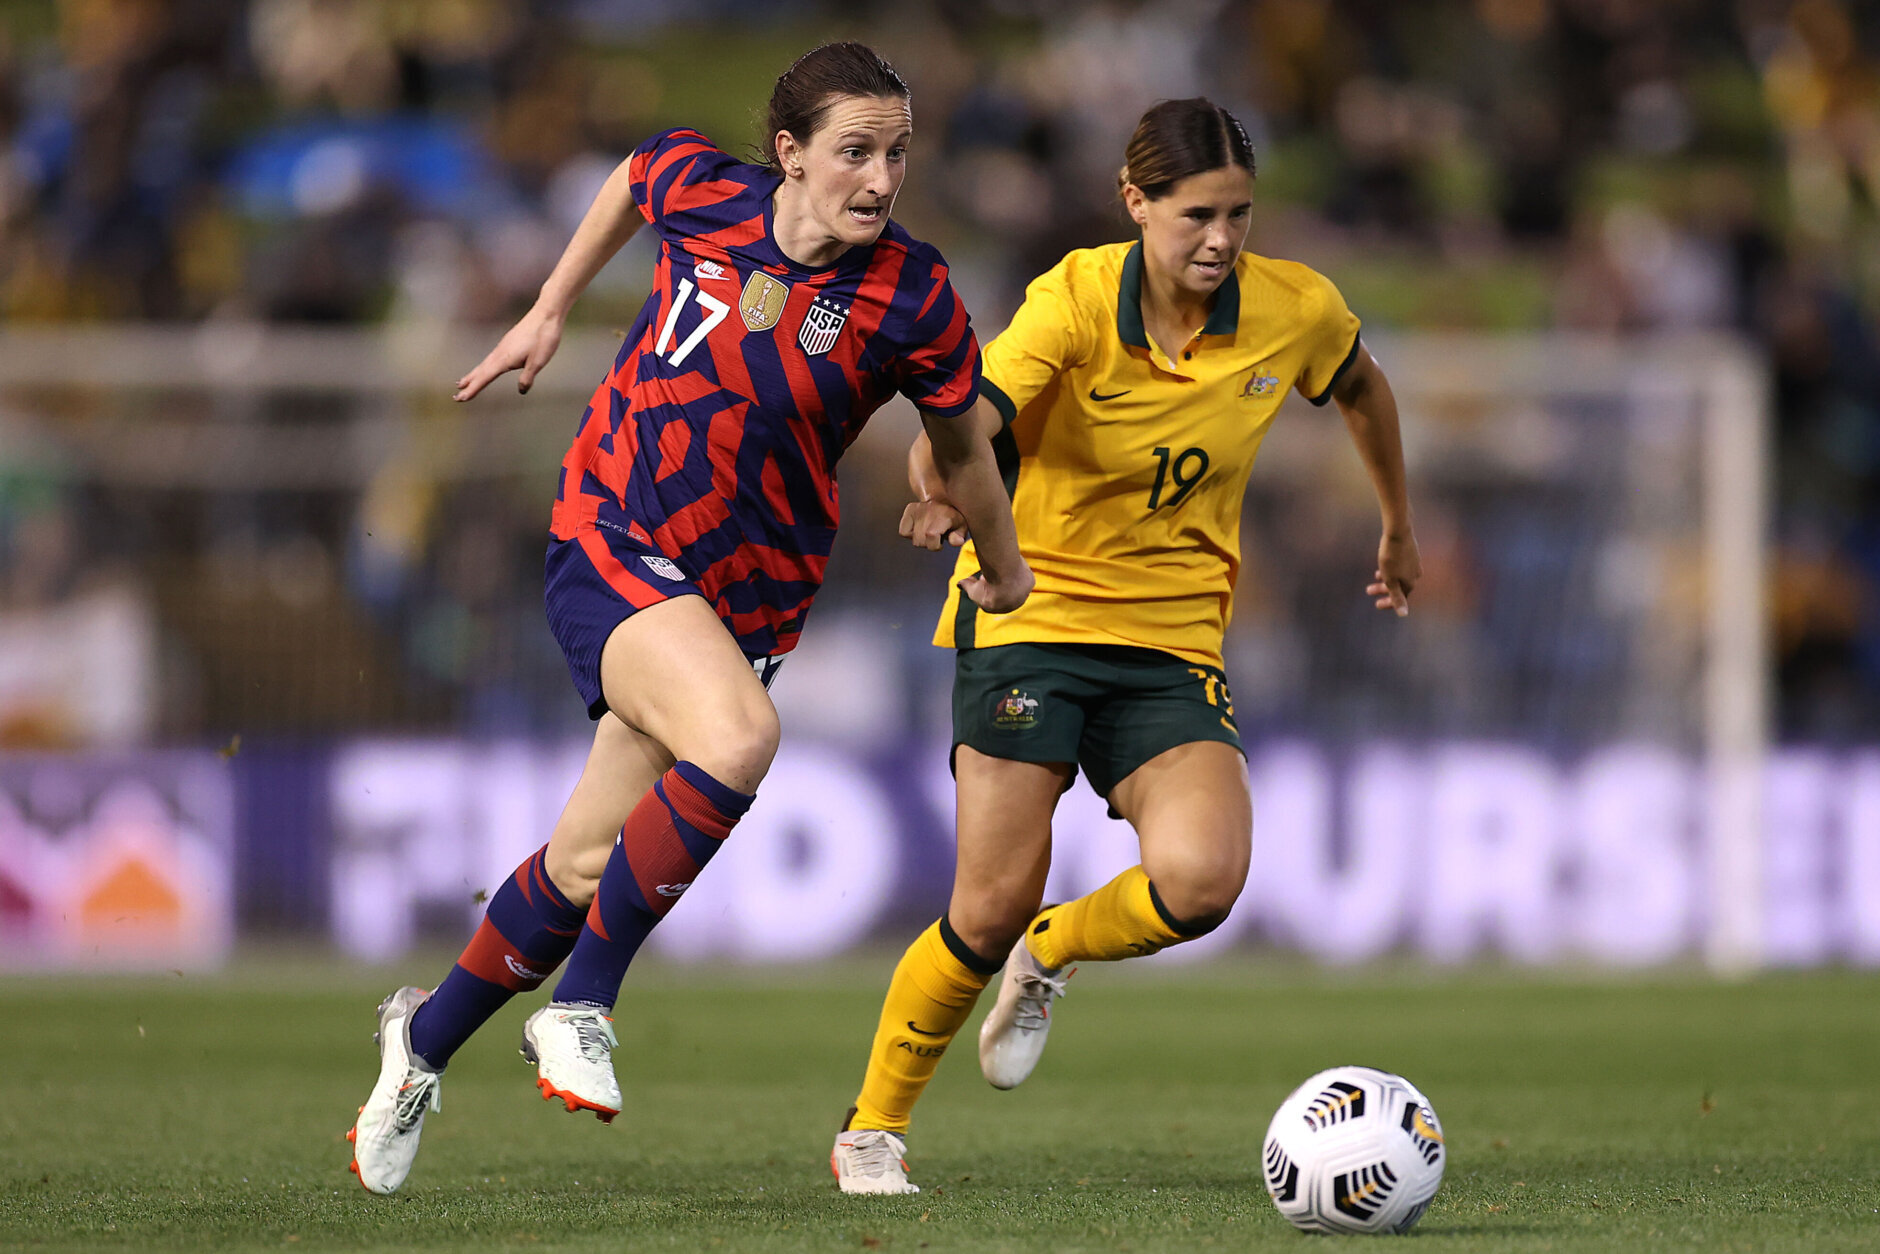 NEWCASTLE, AUSTRALIA - NOVEMBER 30: Andi Sullivan of the United States dribbles the ball in front of Kyra Cooney-Cross of the Matildas during game two of the International Friendly series between the Australia Matildas and the United States of America Women's National Team at McDonald Jones Stadium on November 30, 2021 in Newcastle, Australia. (Photo by Mark Kolbe/Getty Images)